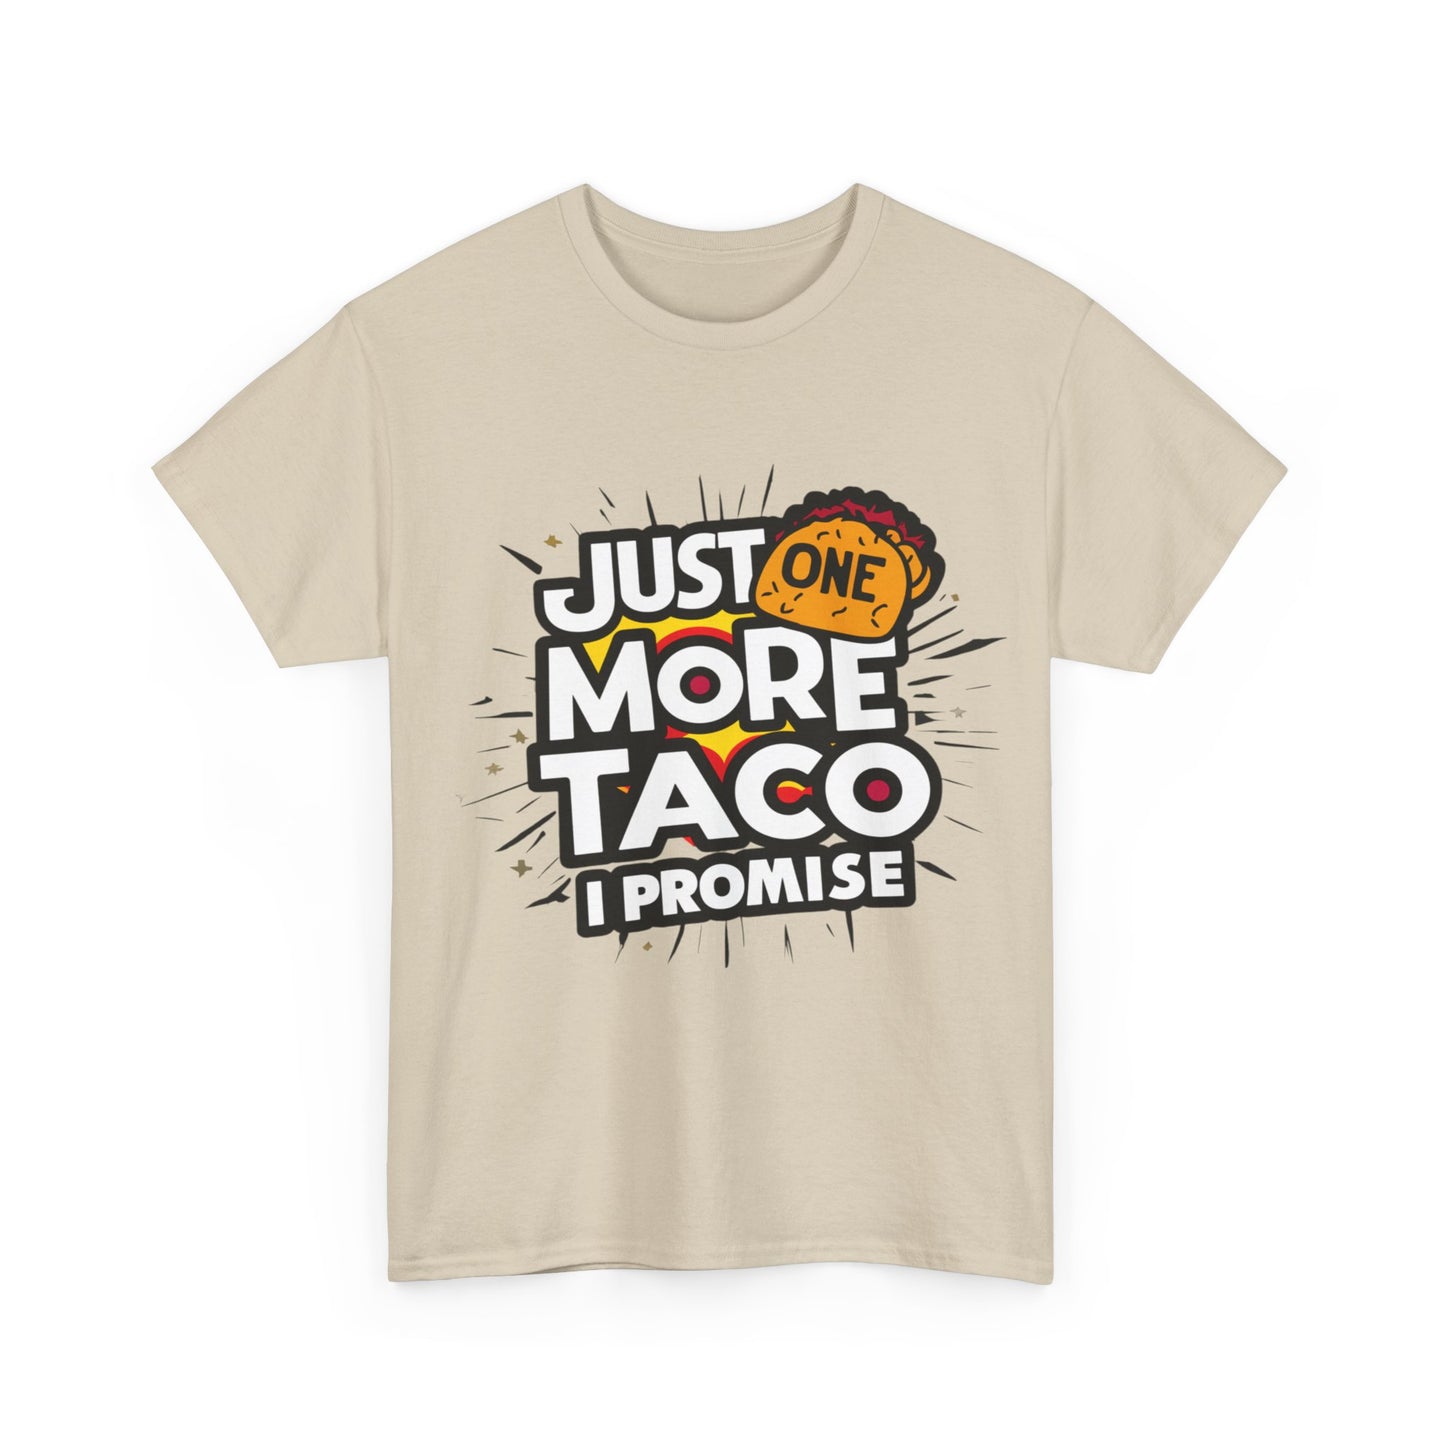 Copy of Just One More Taco I Promise Mexican Food Graphic Unisex Heavy Cotton Tee Cotton Funny Humorous Graphic Soft Premium Unisex Men Women Sand T-shirt Birthday Gift-36